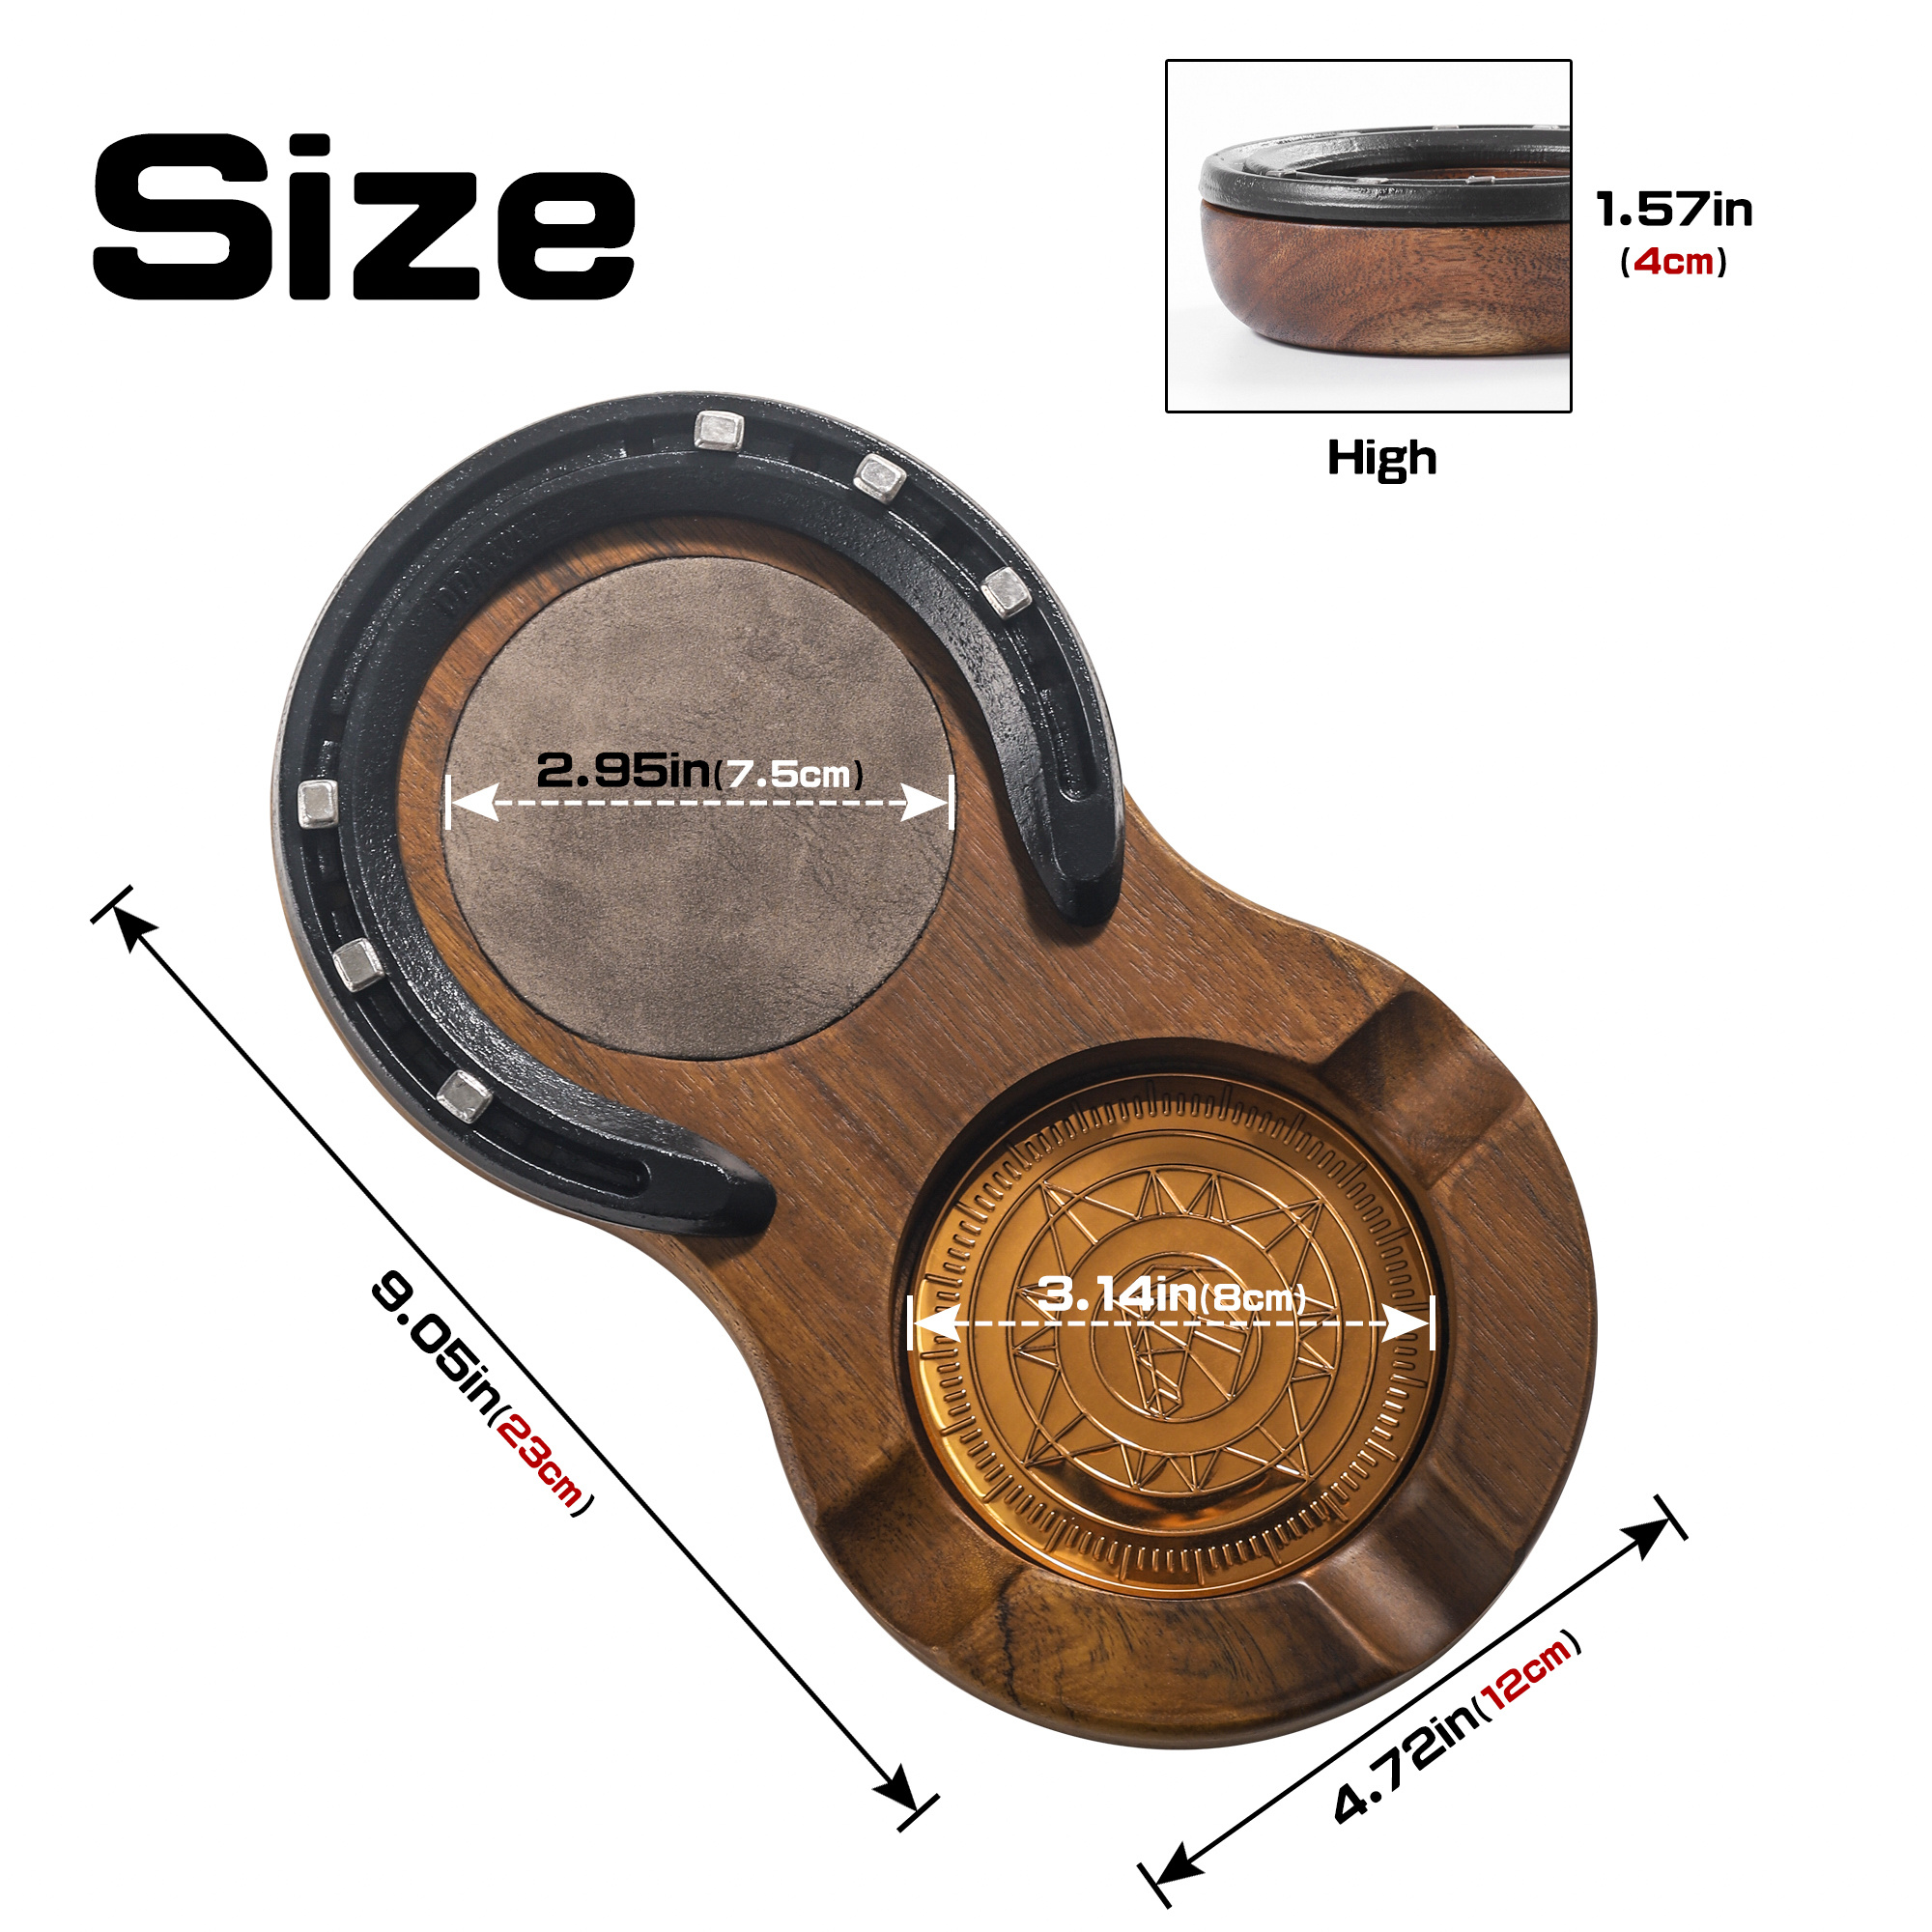 1pc wooden cigar ashtray handmade horseshoe design cigar accessories with 3 cigar slot portable travel cigar gifts for men indoor outdoor patio home office use details 2